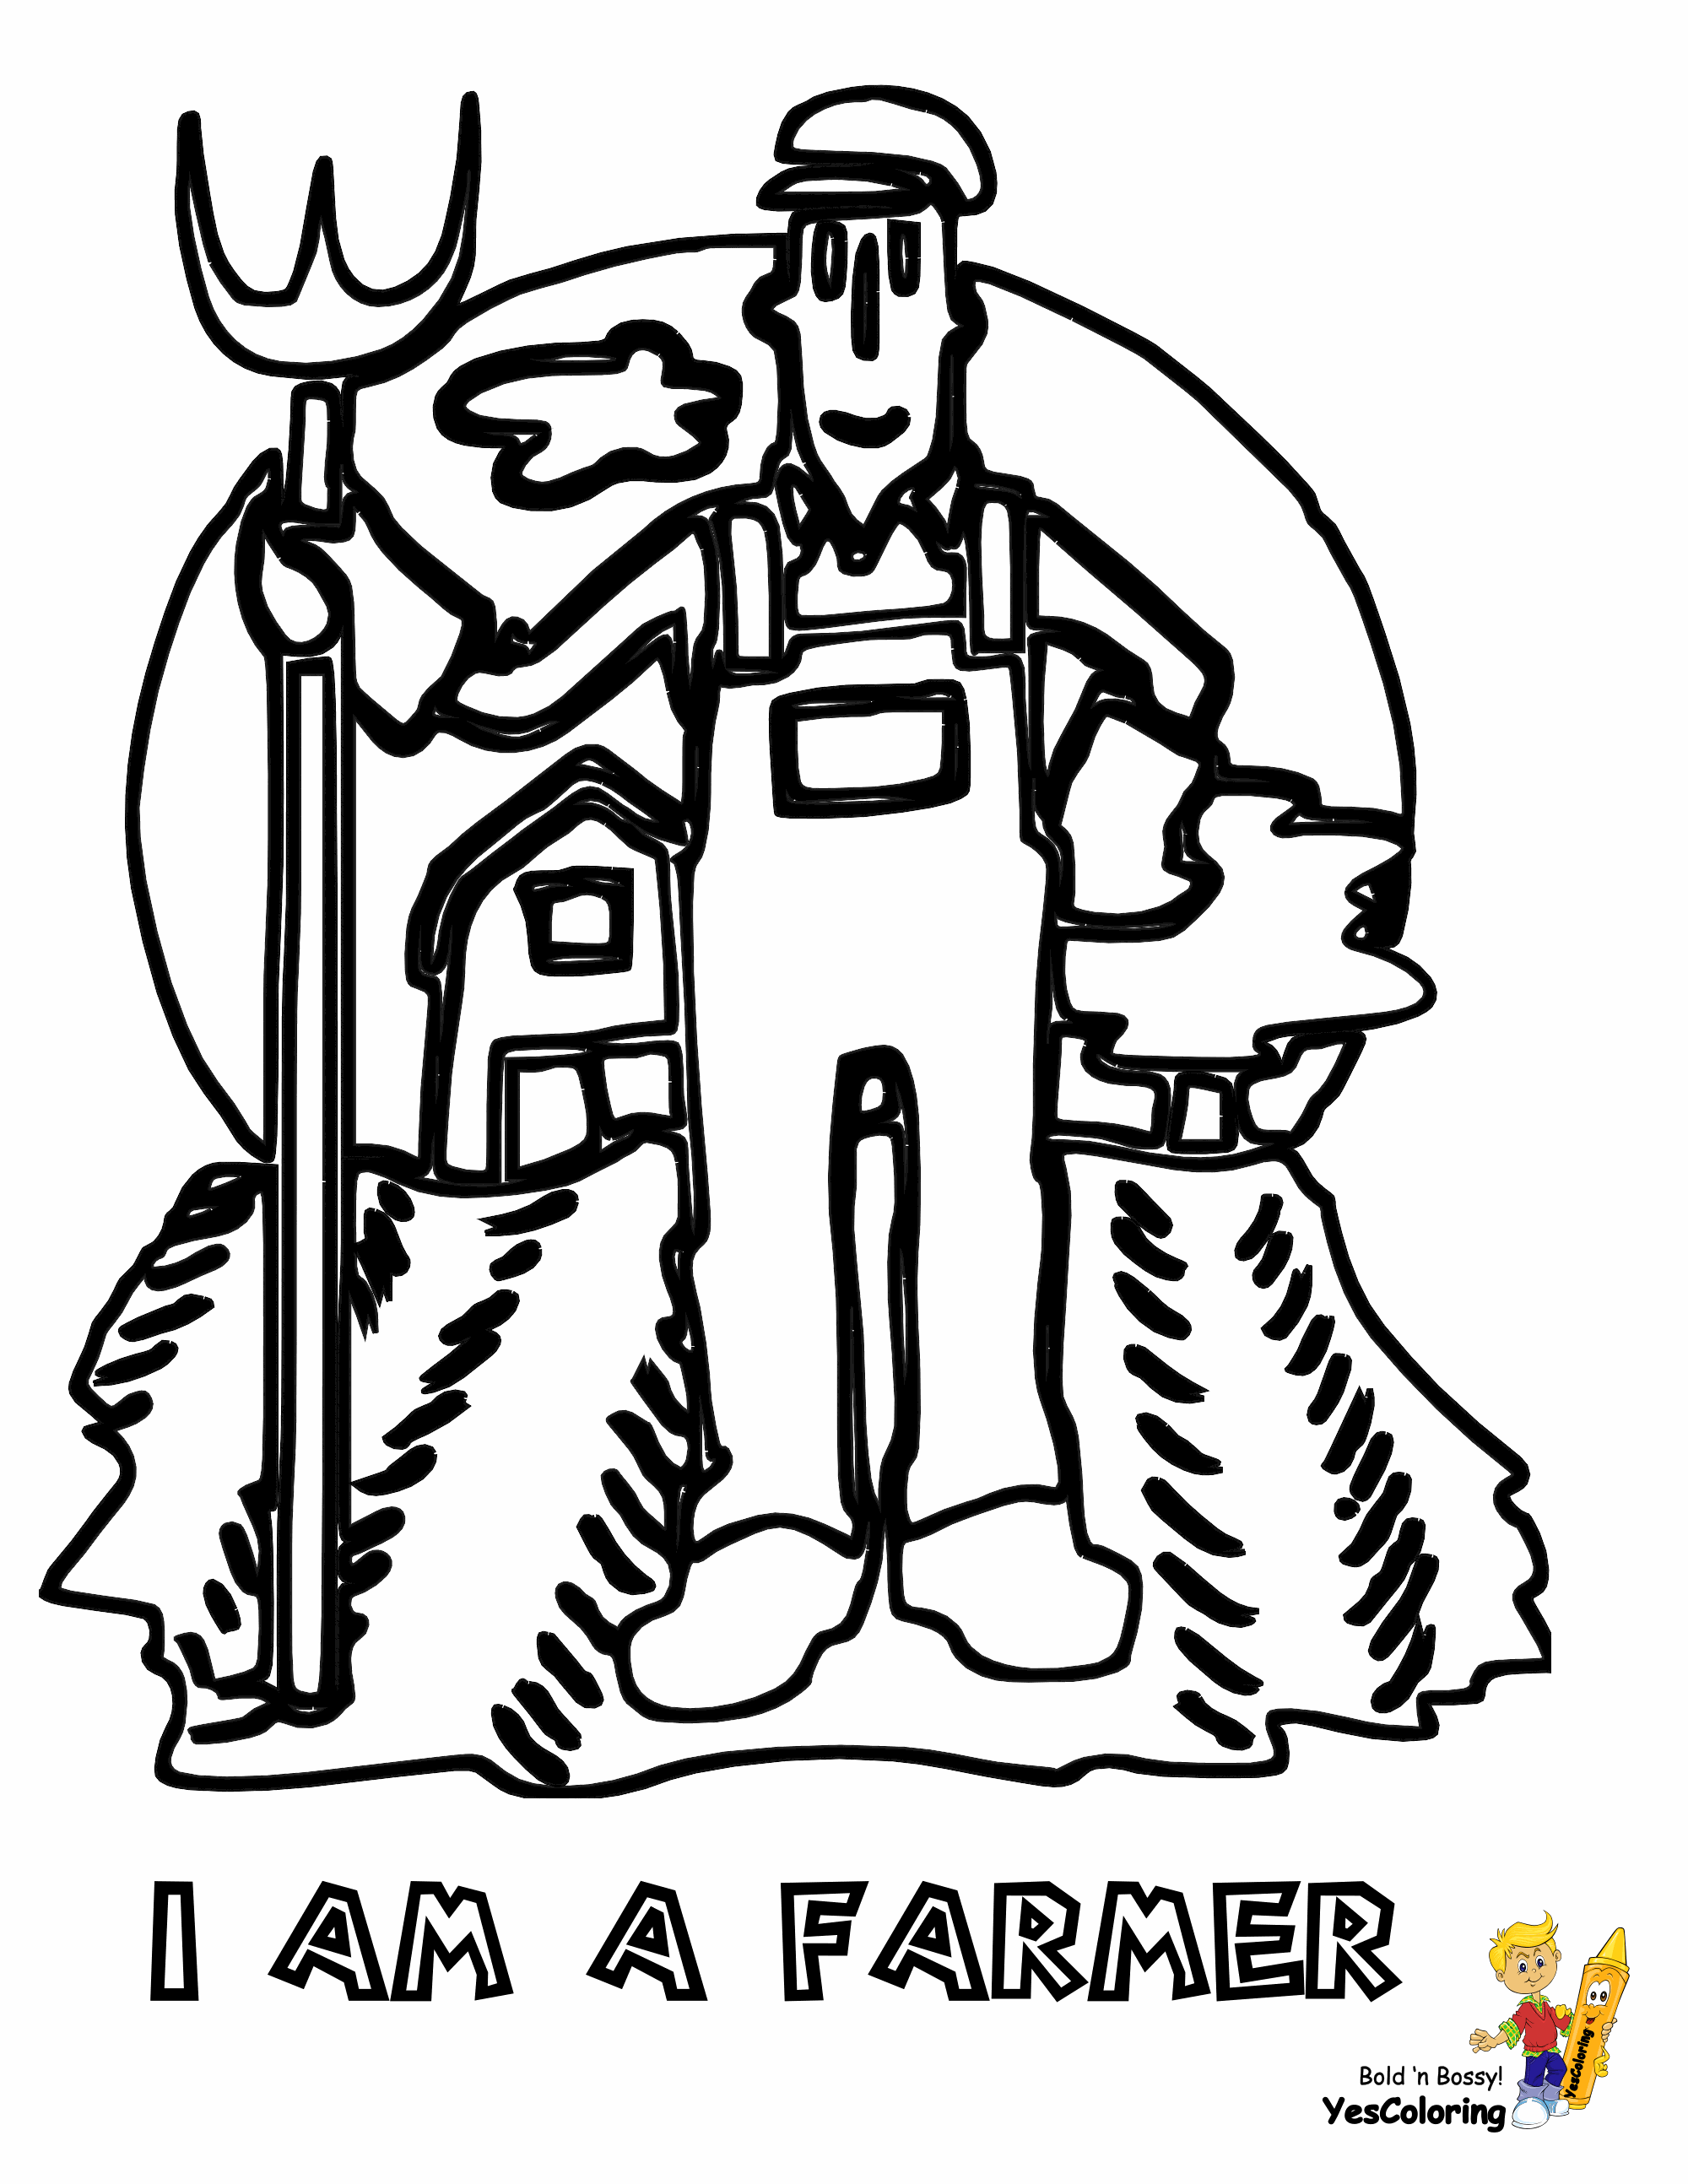 farmer coloring sheet farmer coloring page on the farm coloring pages farm farmer coloring sheet 